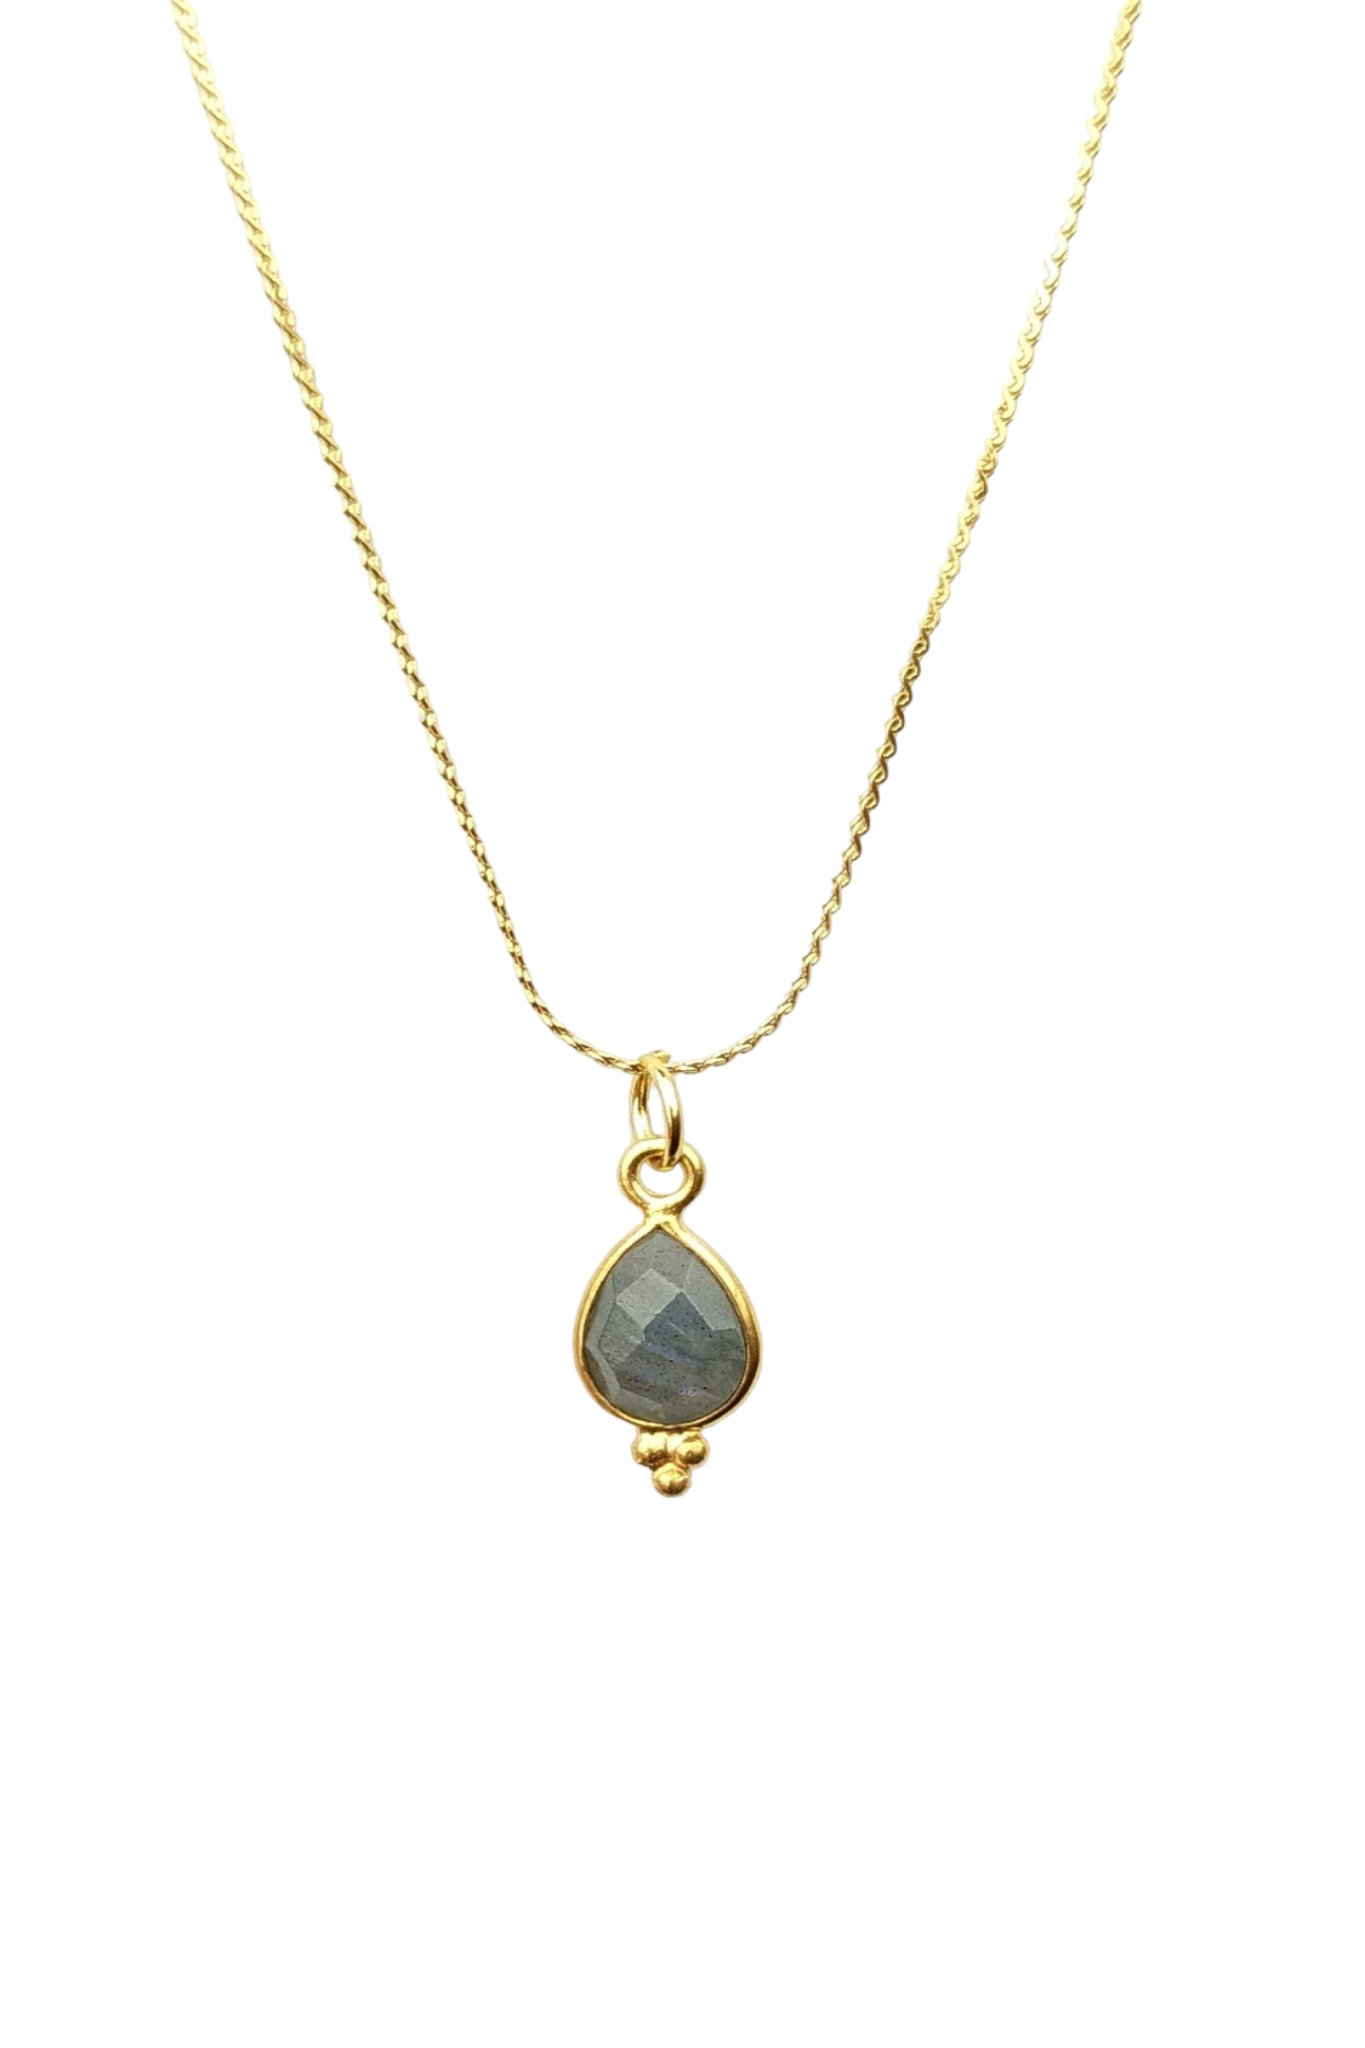 Protection - Aura Shield - Crown Chakra Necklace pendant stay gold by mme bovary